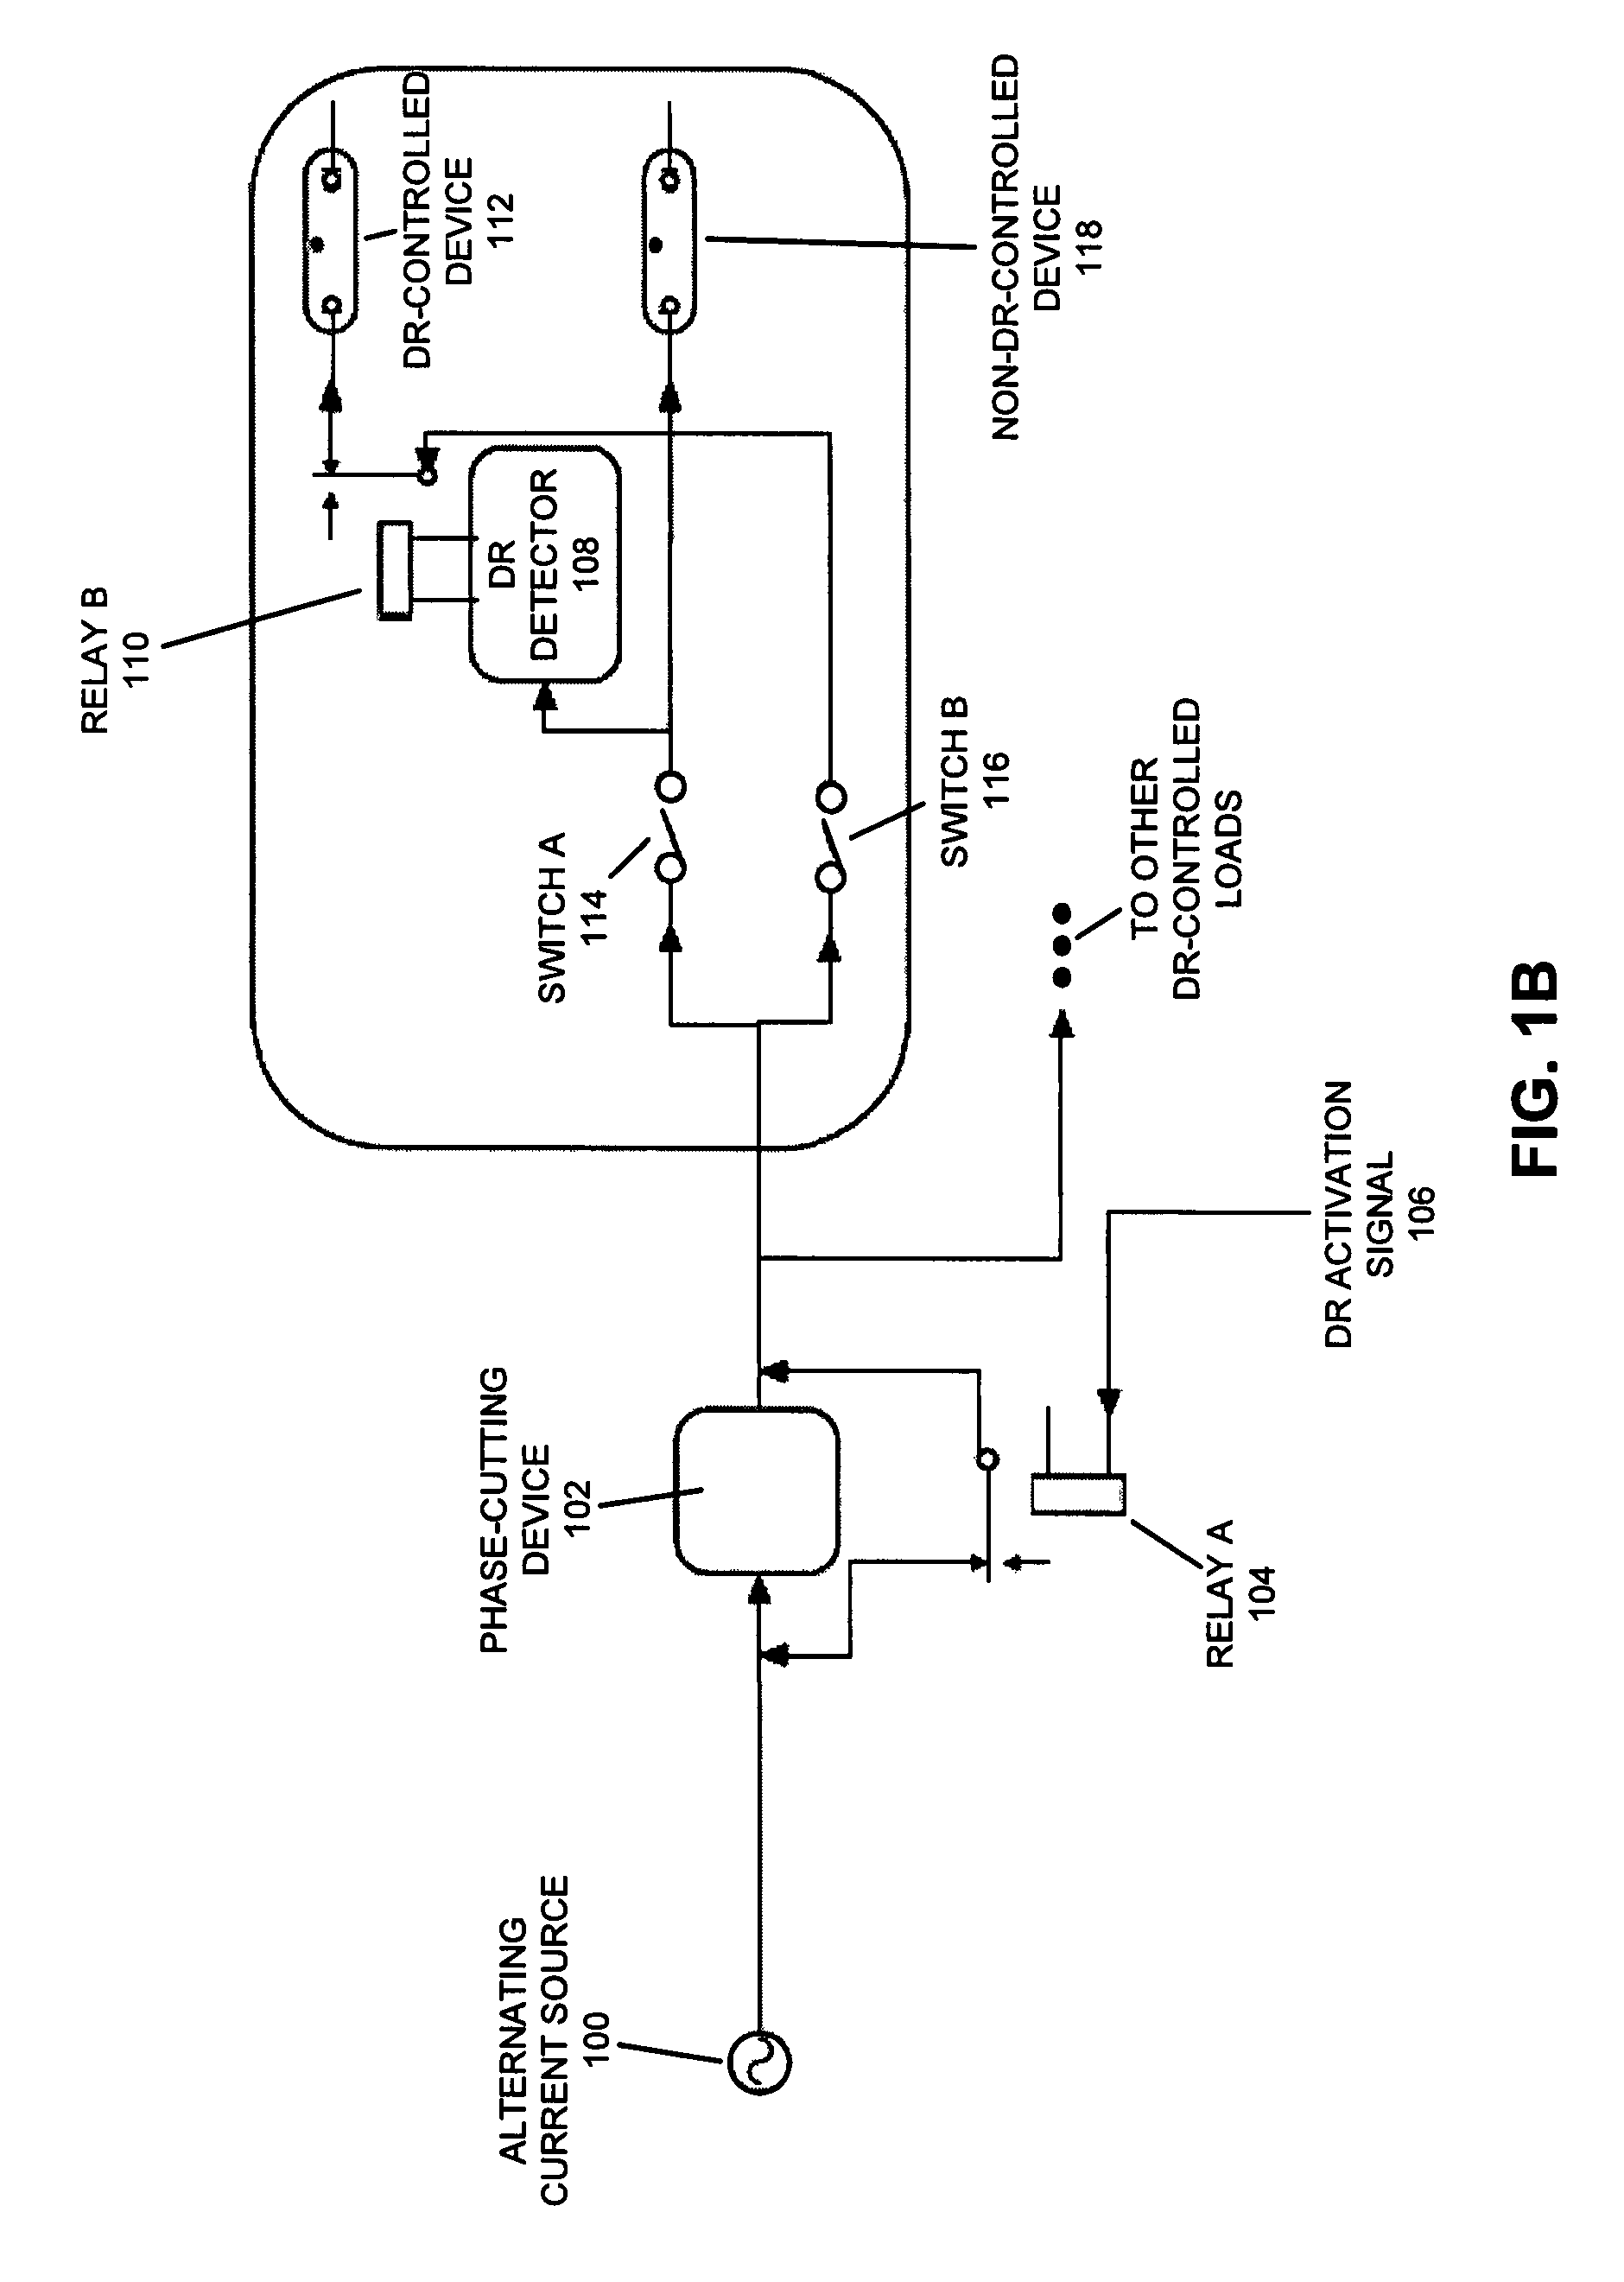 Method and apparatus for using power-line phase-cut signaling to change energy usage